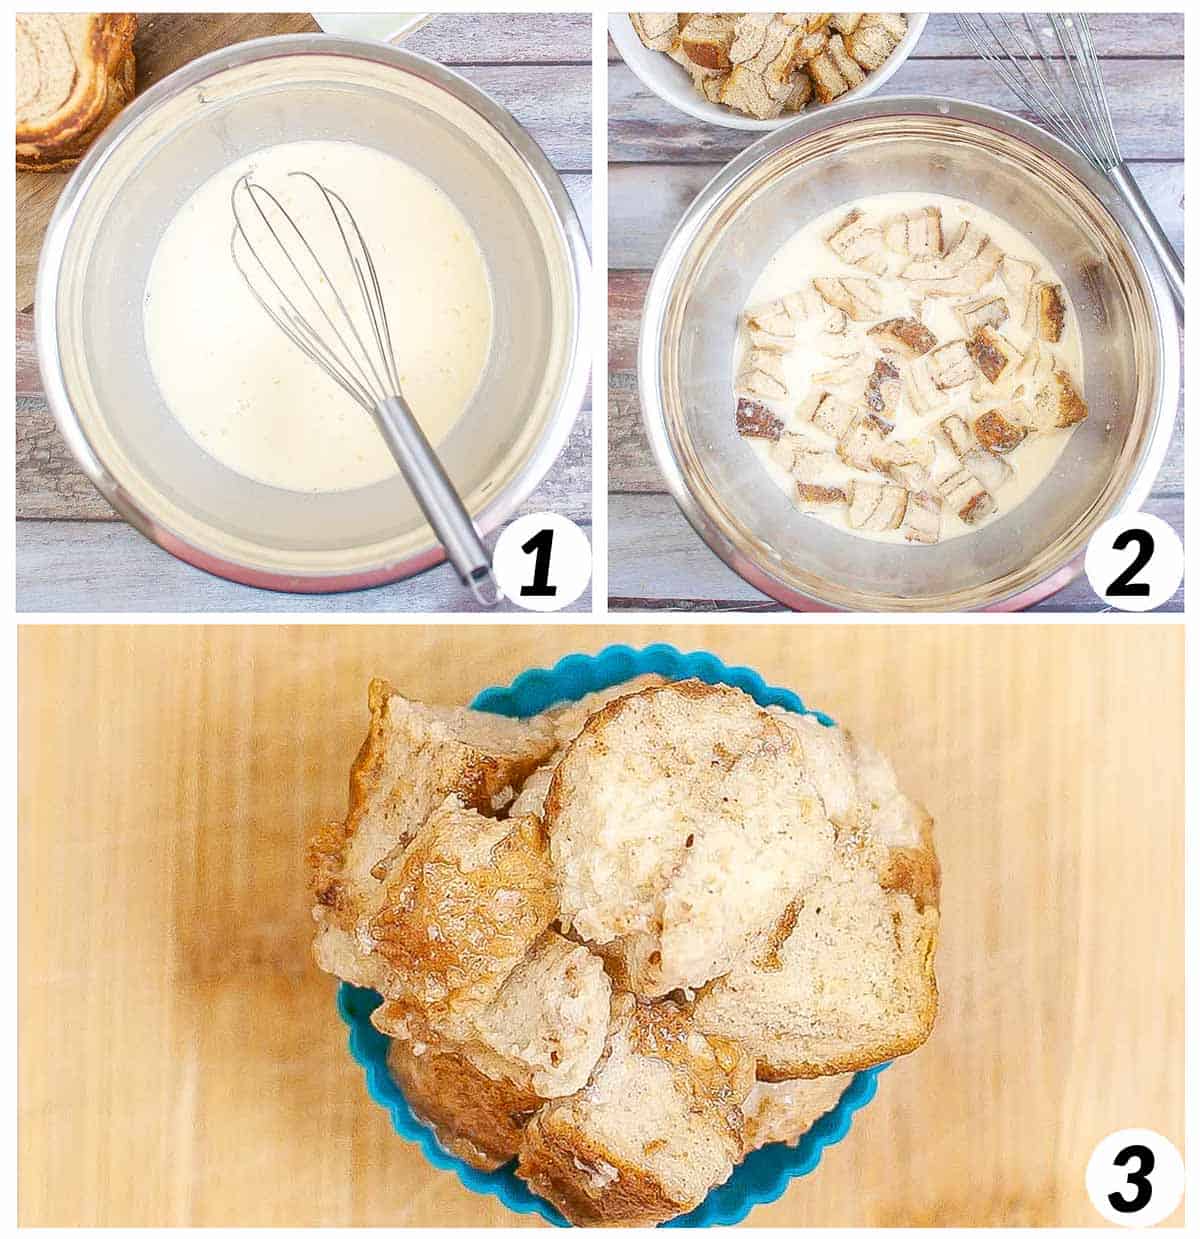 Three panel grid of process shots 1-3 - whisking together wet ingredients, coating bread pieces in the mixture, and arranging into cupcake liners.